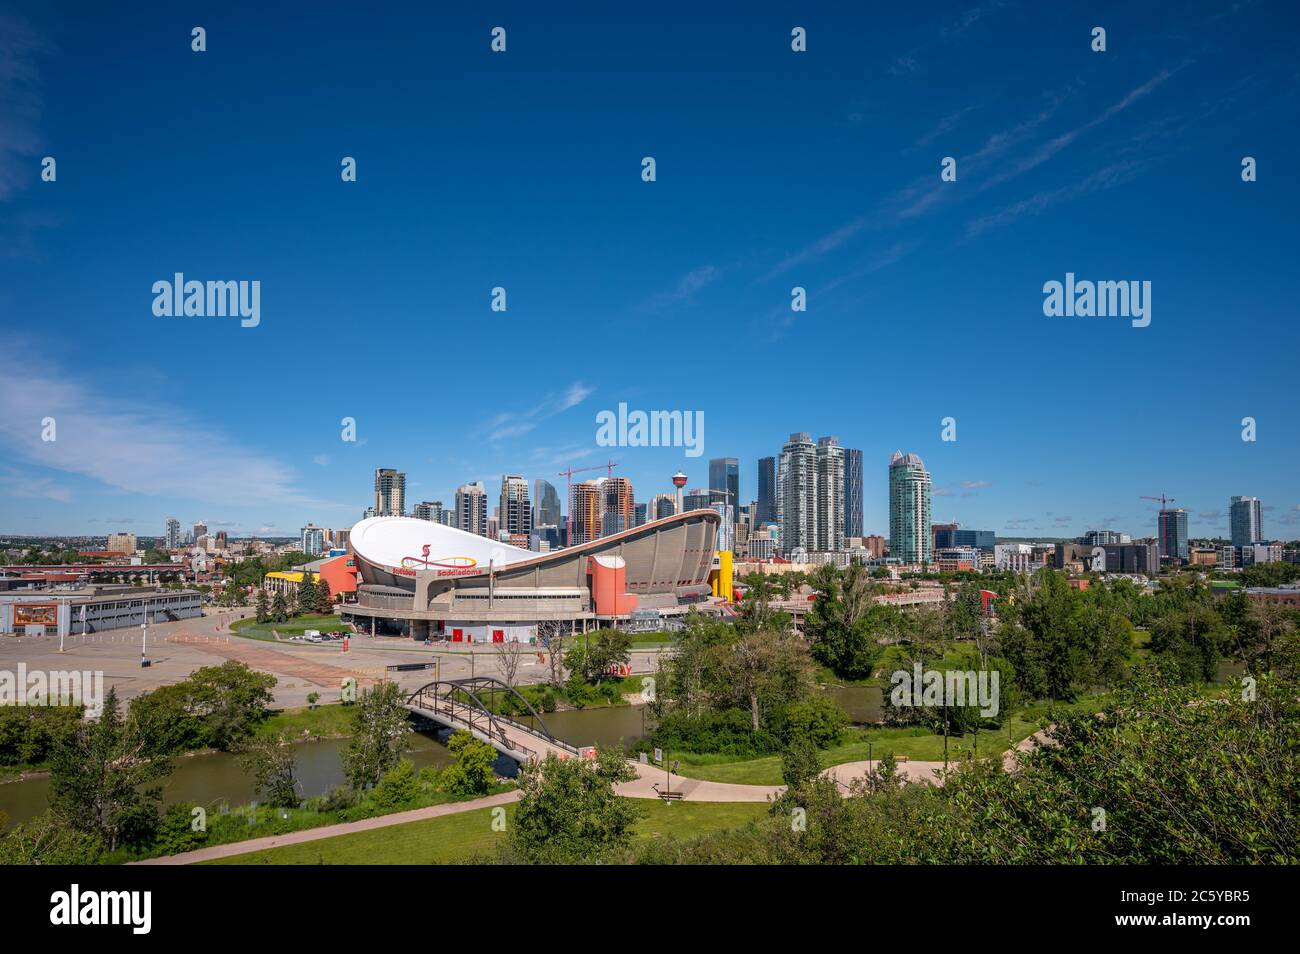 Calgary, Alberta - July 5, 2020: Calgary's Scotiabank Saddledome and the downtown skyline. The Saddledome is scheduled to be replaced in the near futu Stock Photo